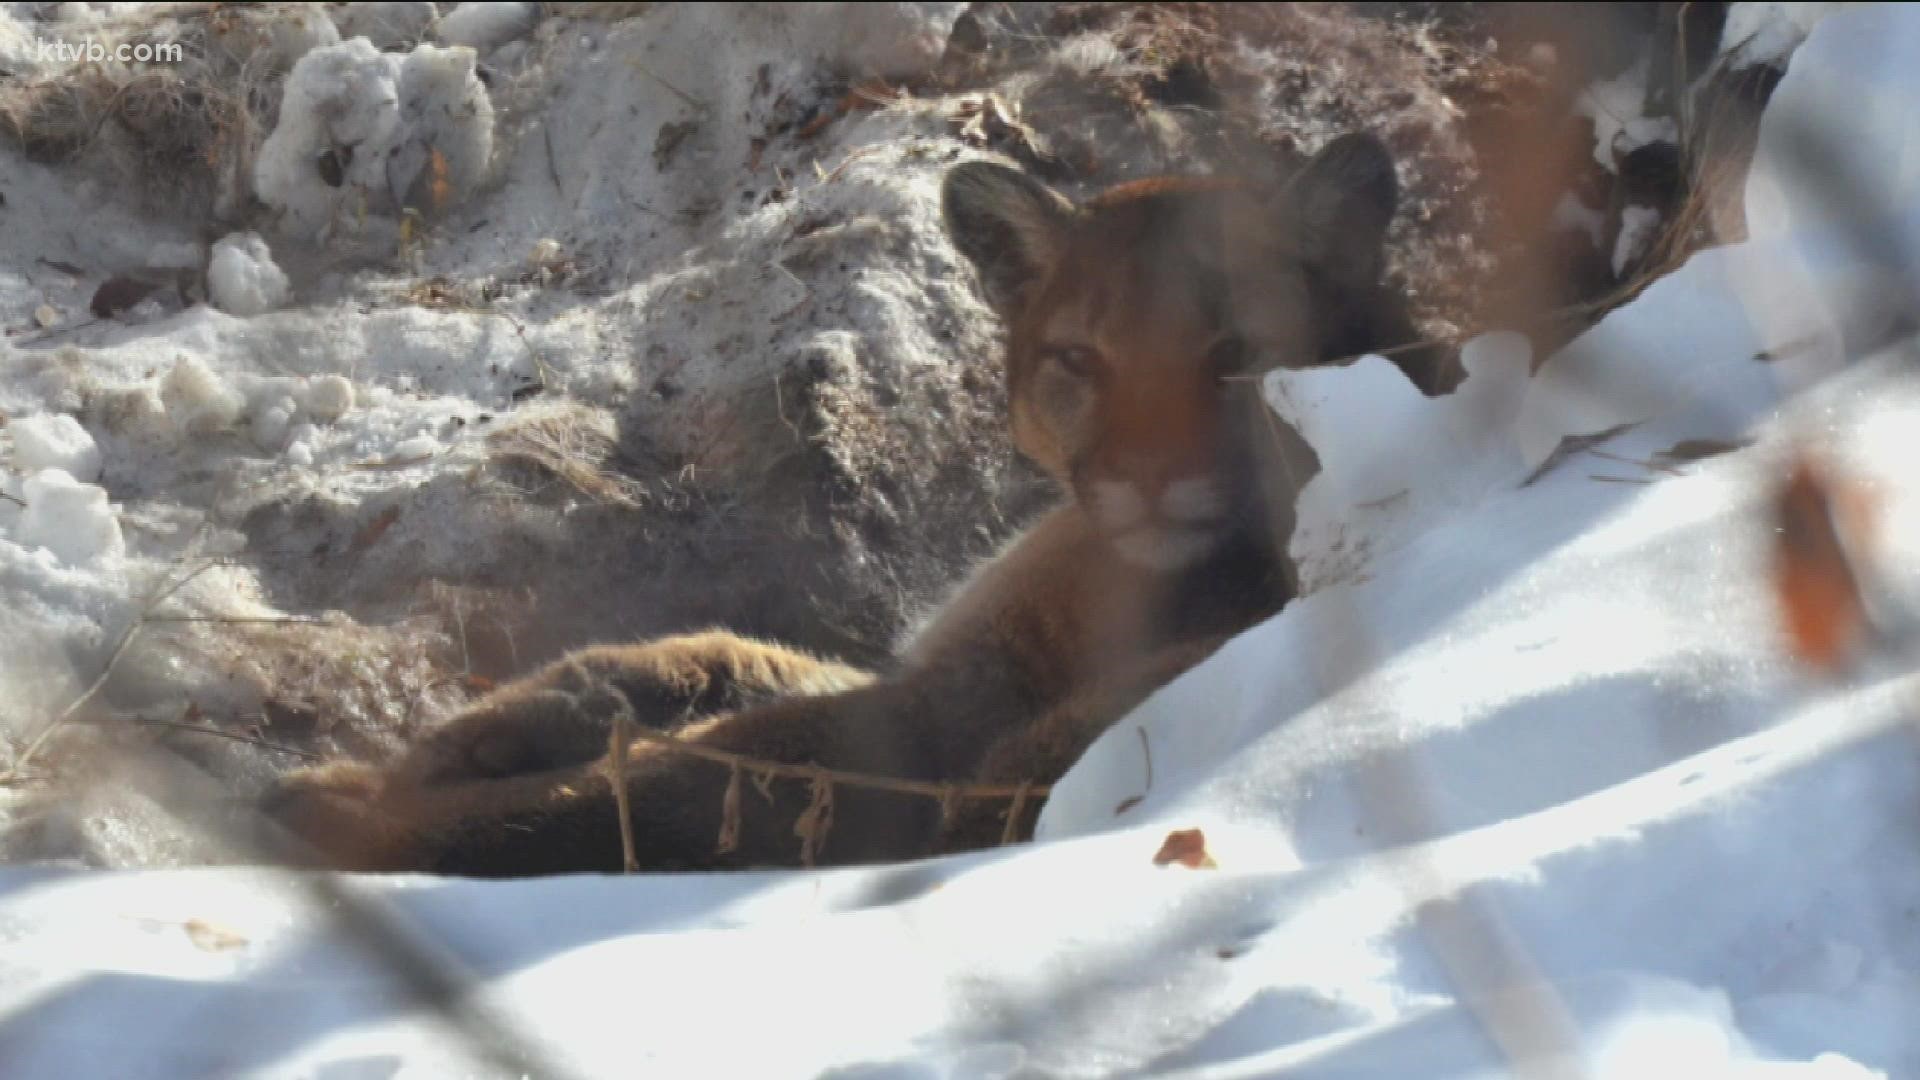 Fish and Game biologists are concerned that the mountain lion is becoming habituated to living within the community.